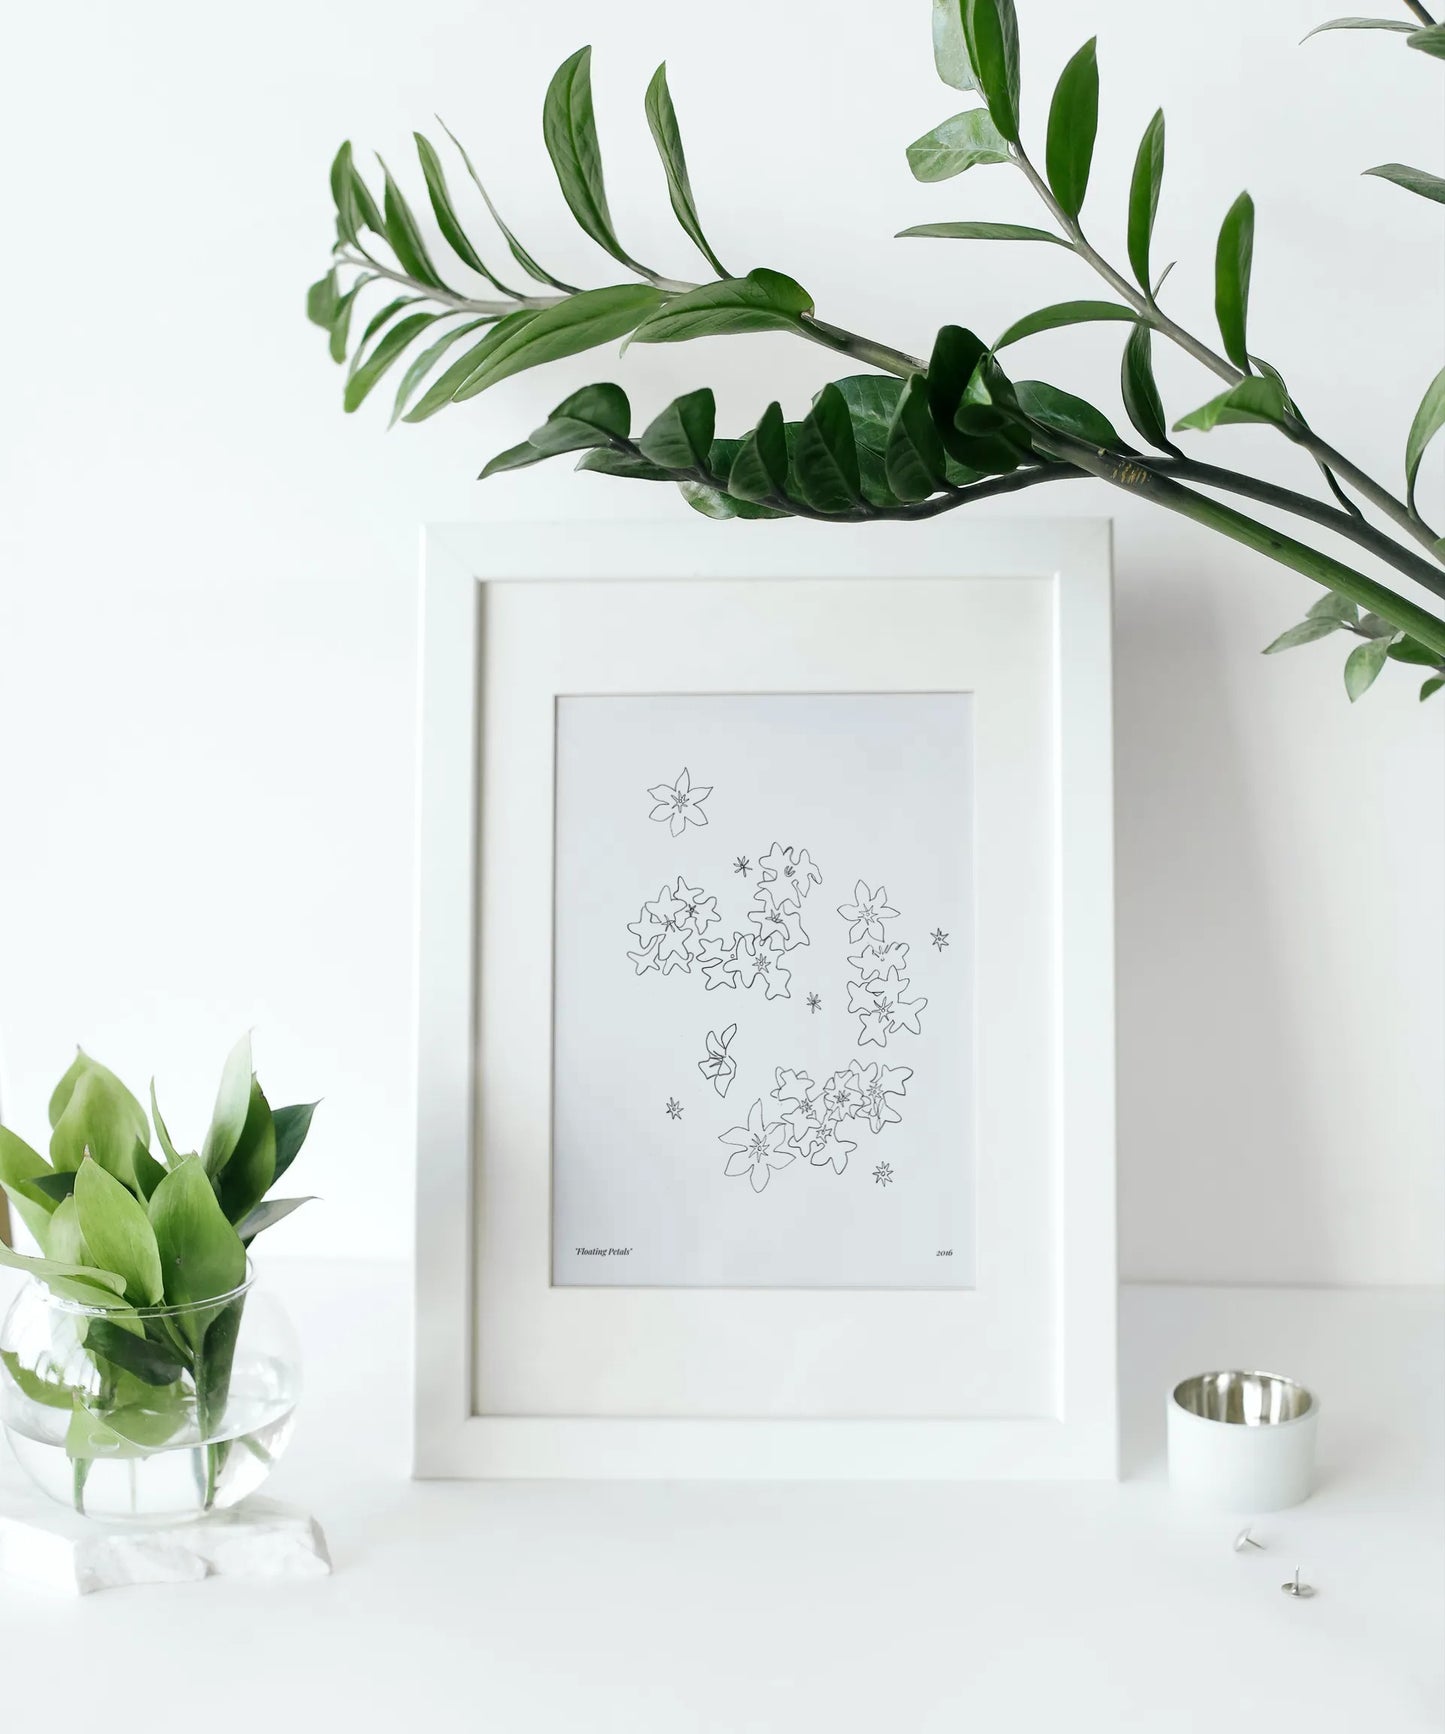 The Floral Drawings | "Floating Petals"Print